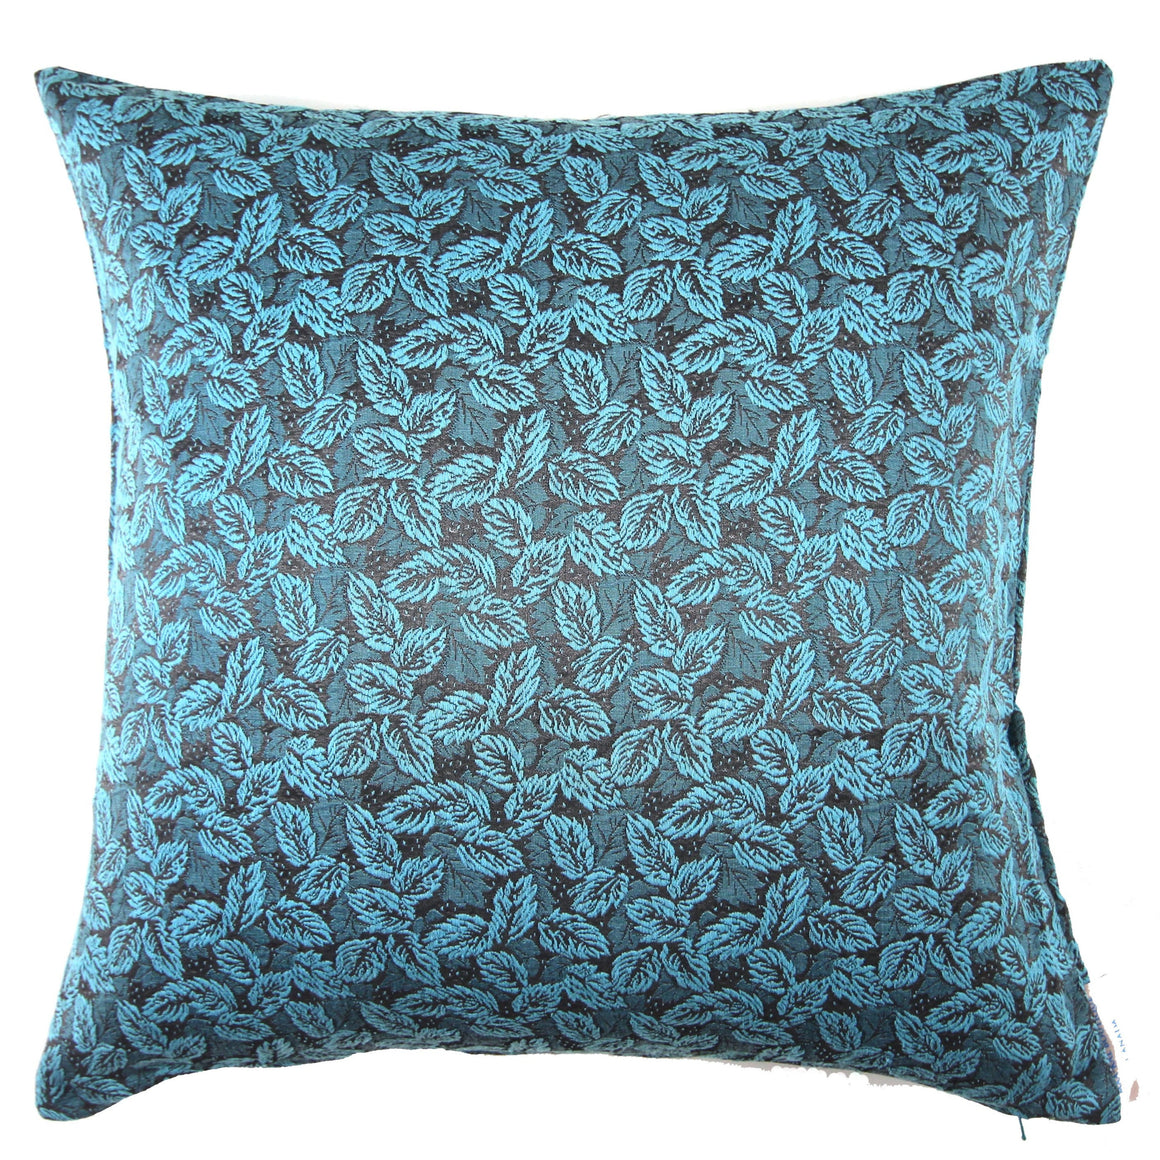 Ines - Embroidered Turquoise Leaves Pillow Cover - 20x20 - Maa-Kal Boutique Canada